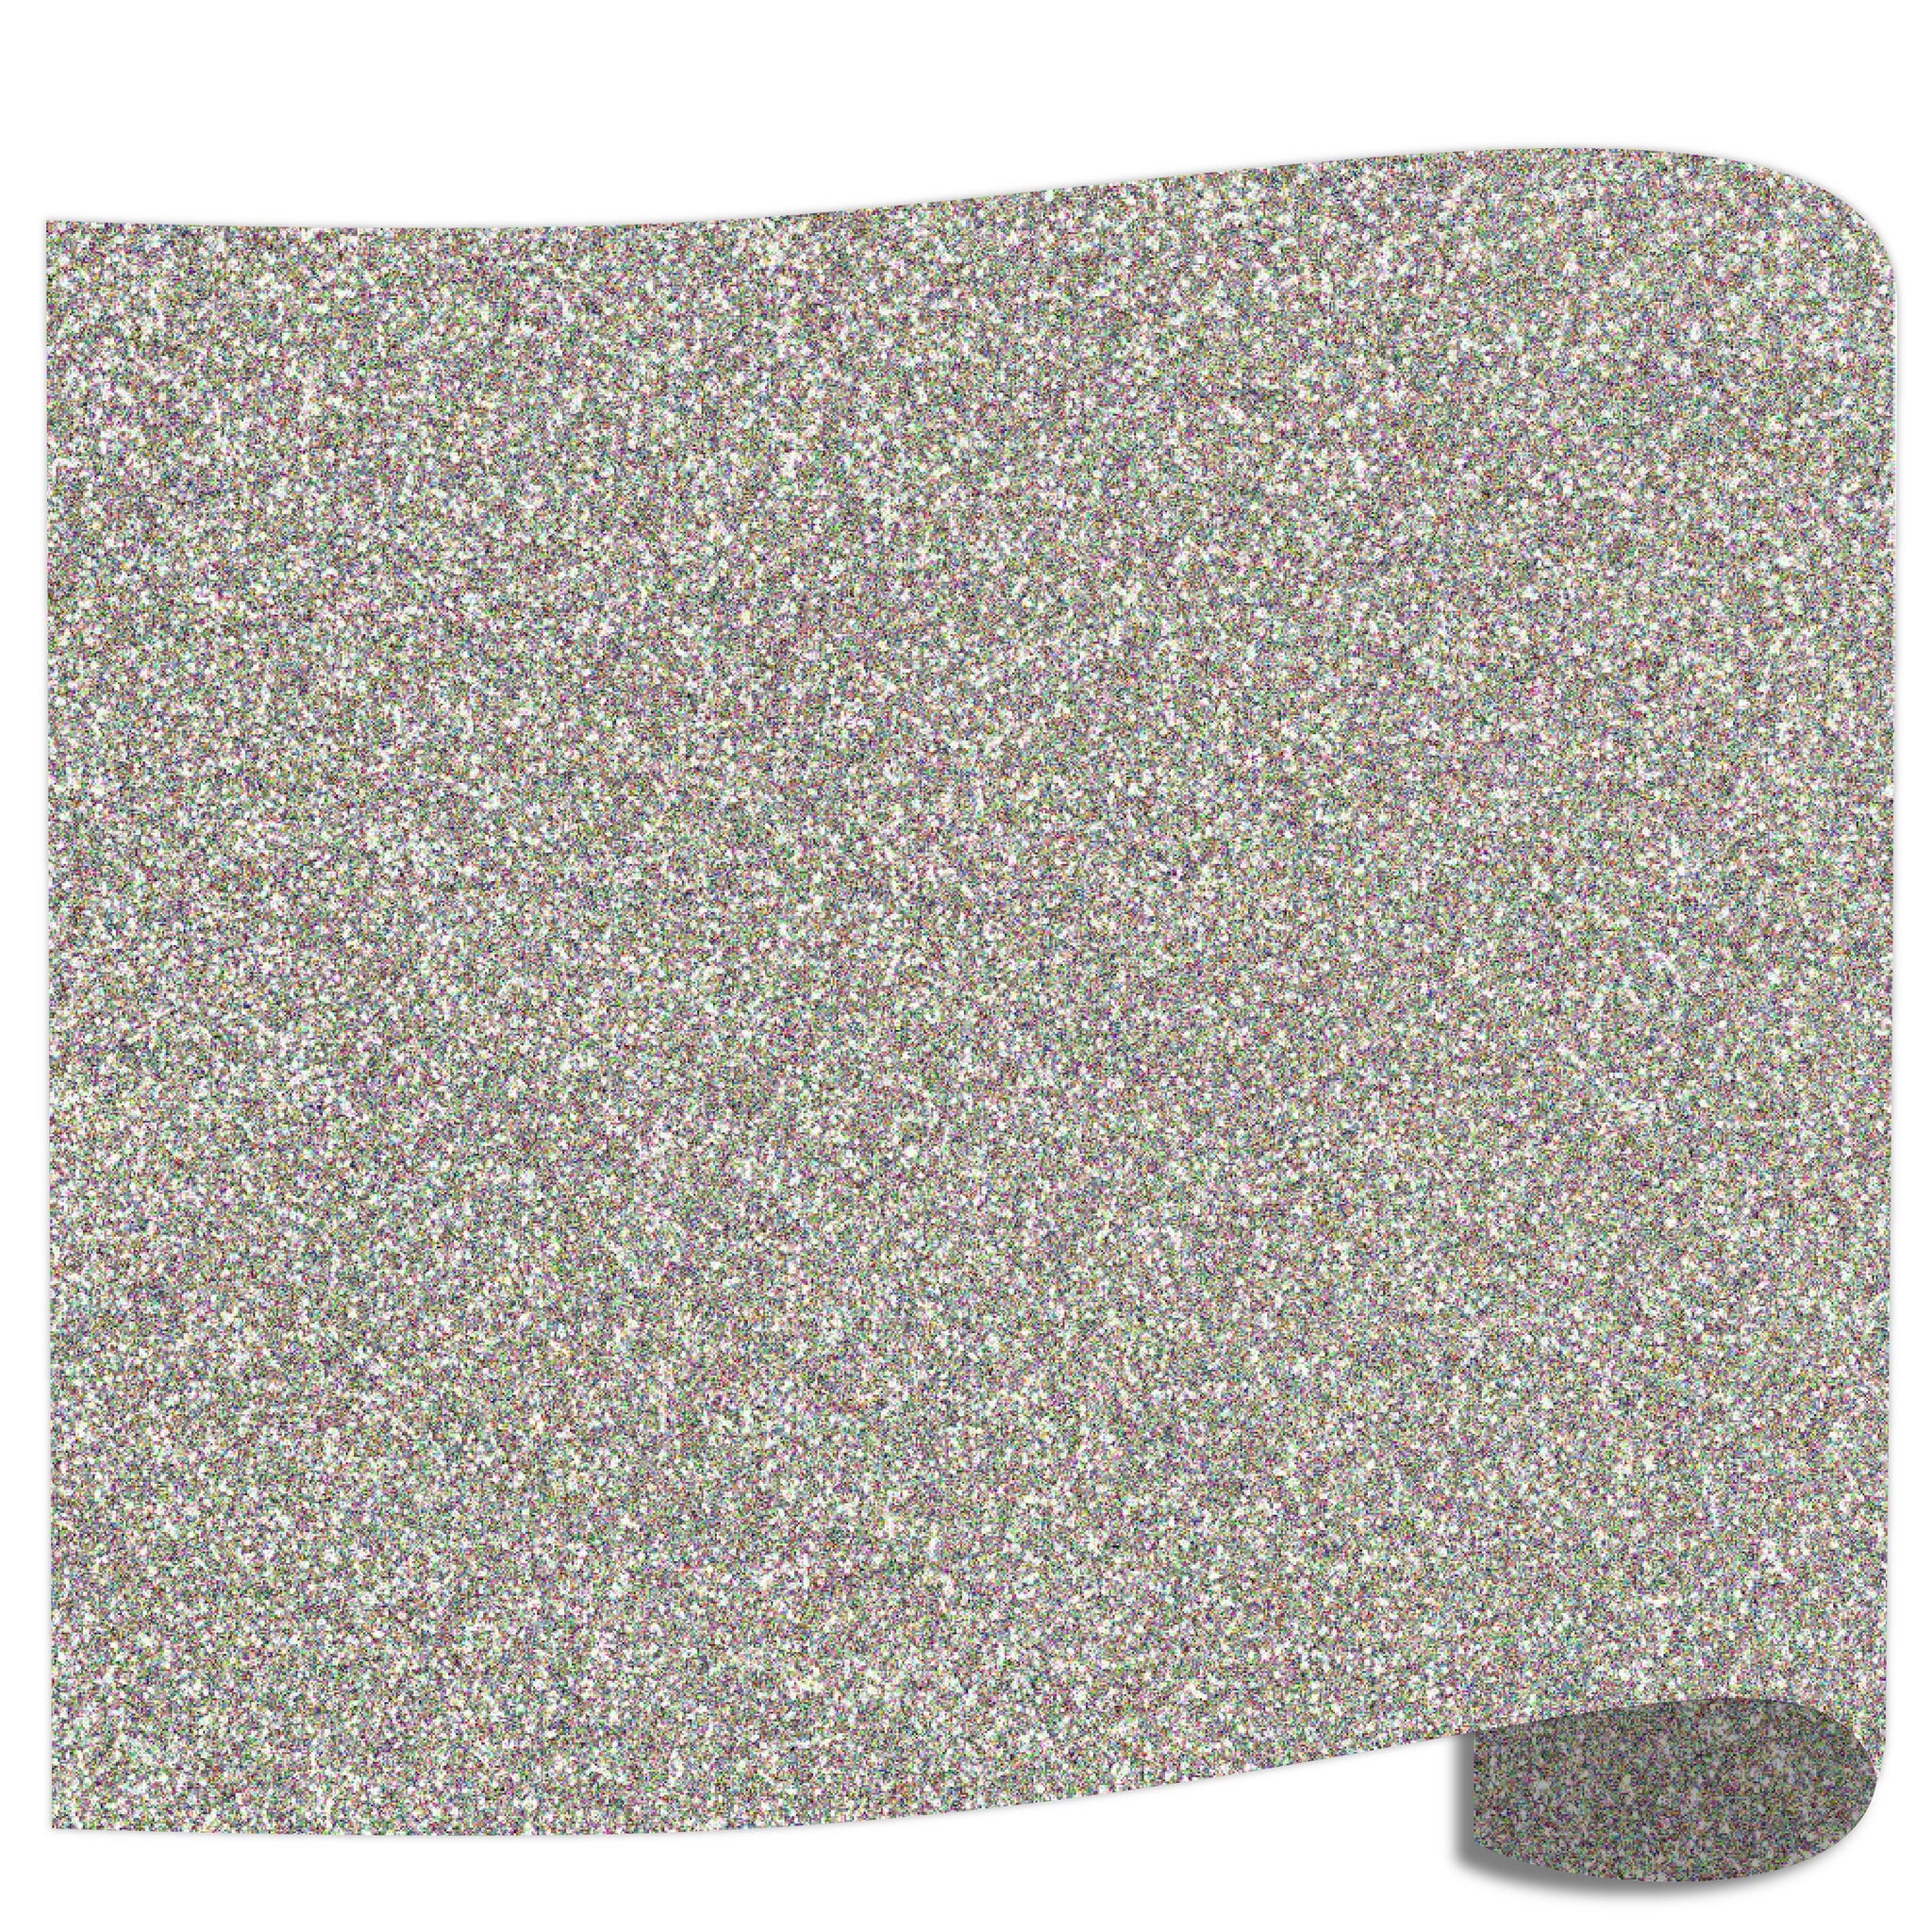 Siser Holographic Silver 12 inch x 20 inch Sheet